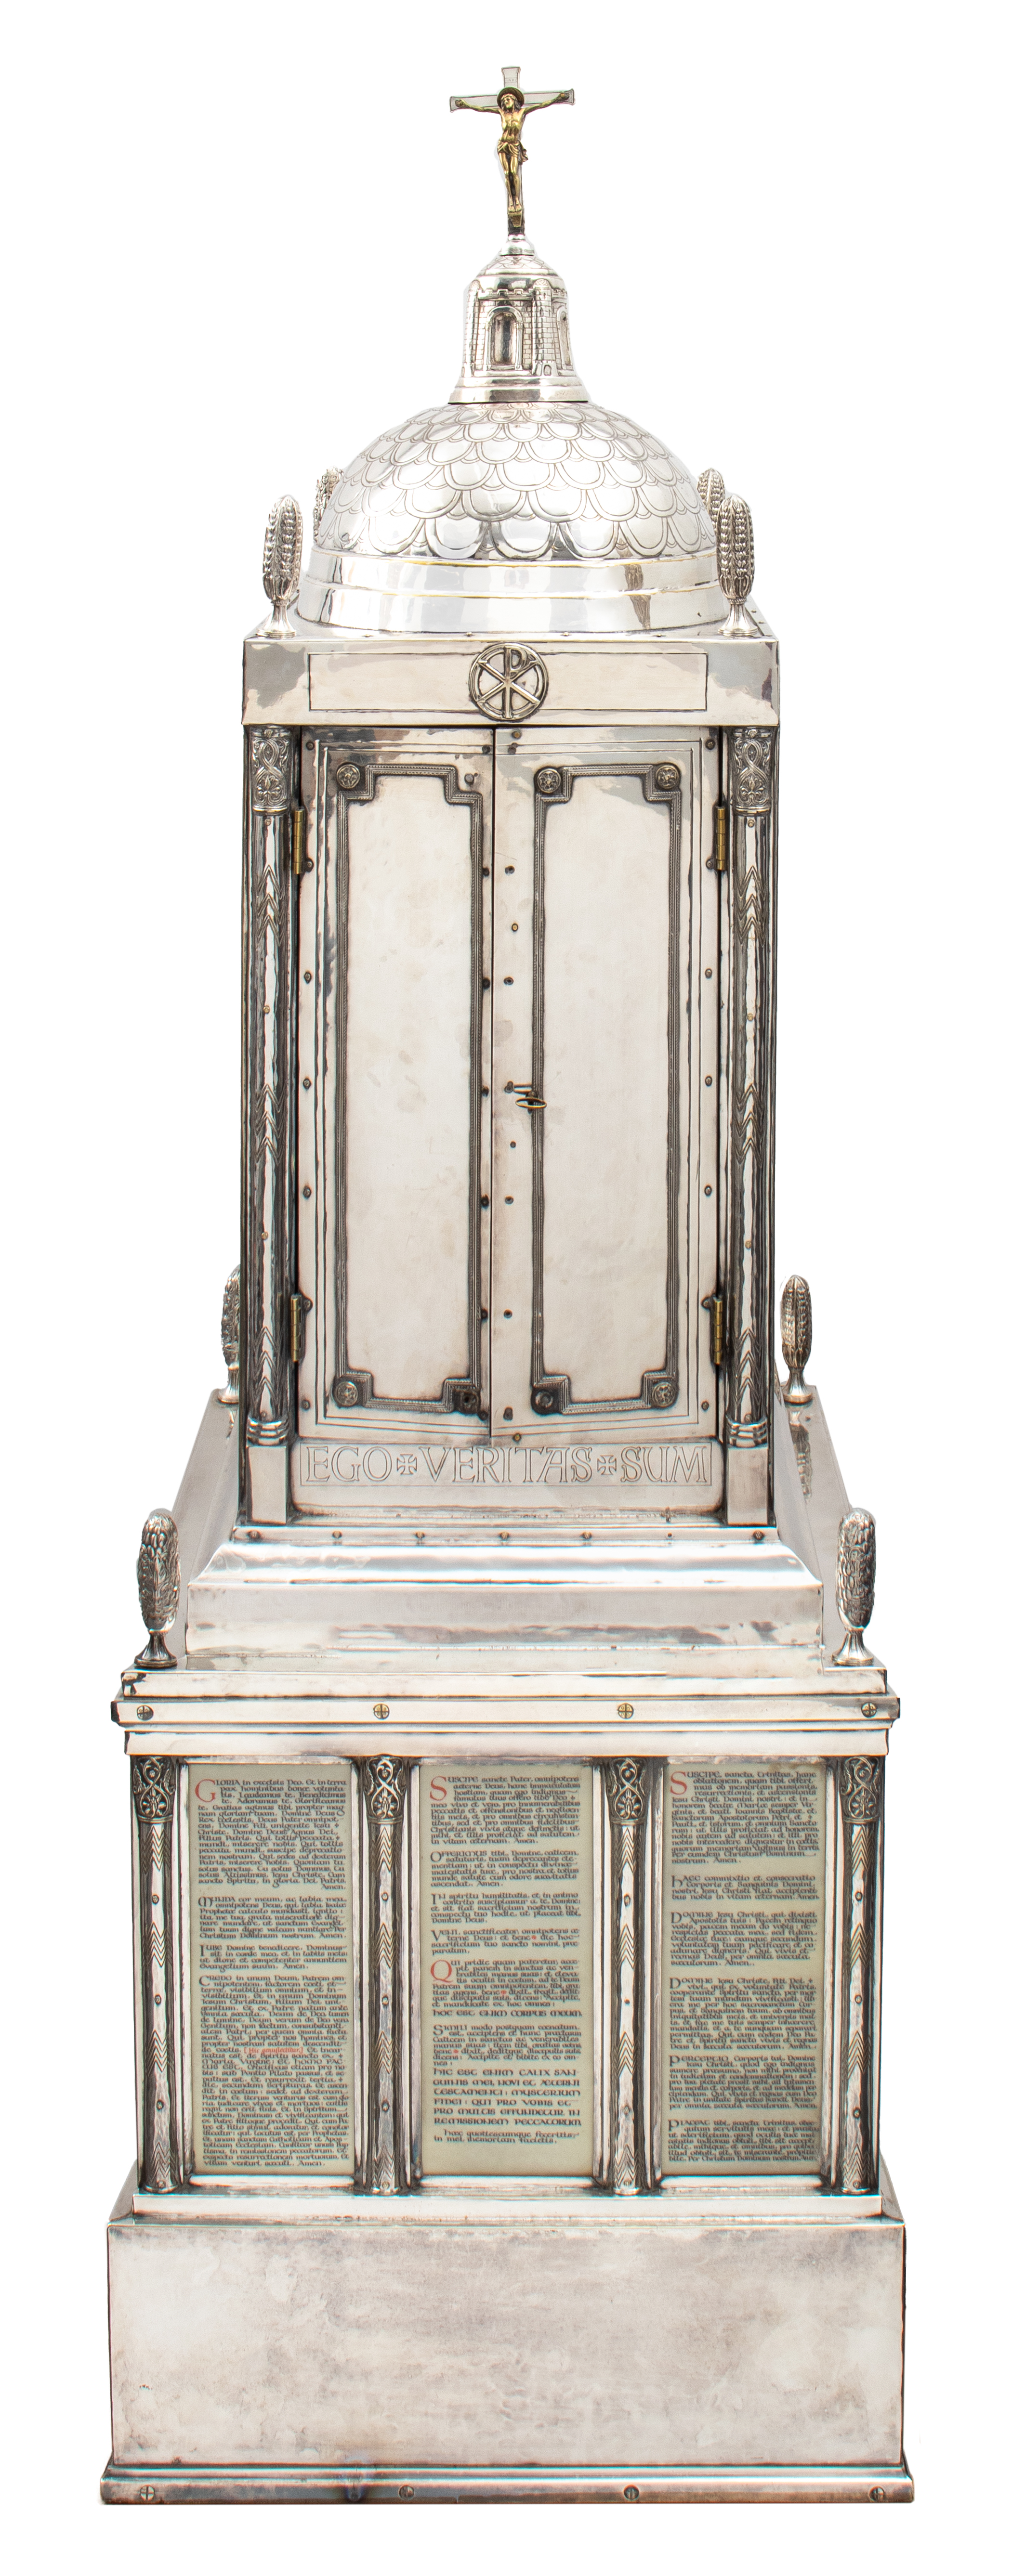 MONUMENTAL SILVERED HOLY TABERNACLE